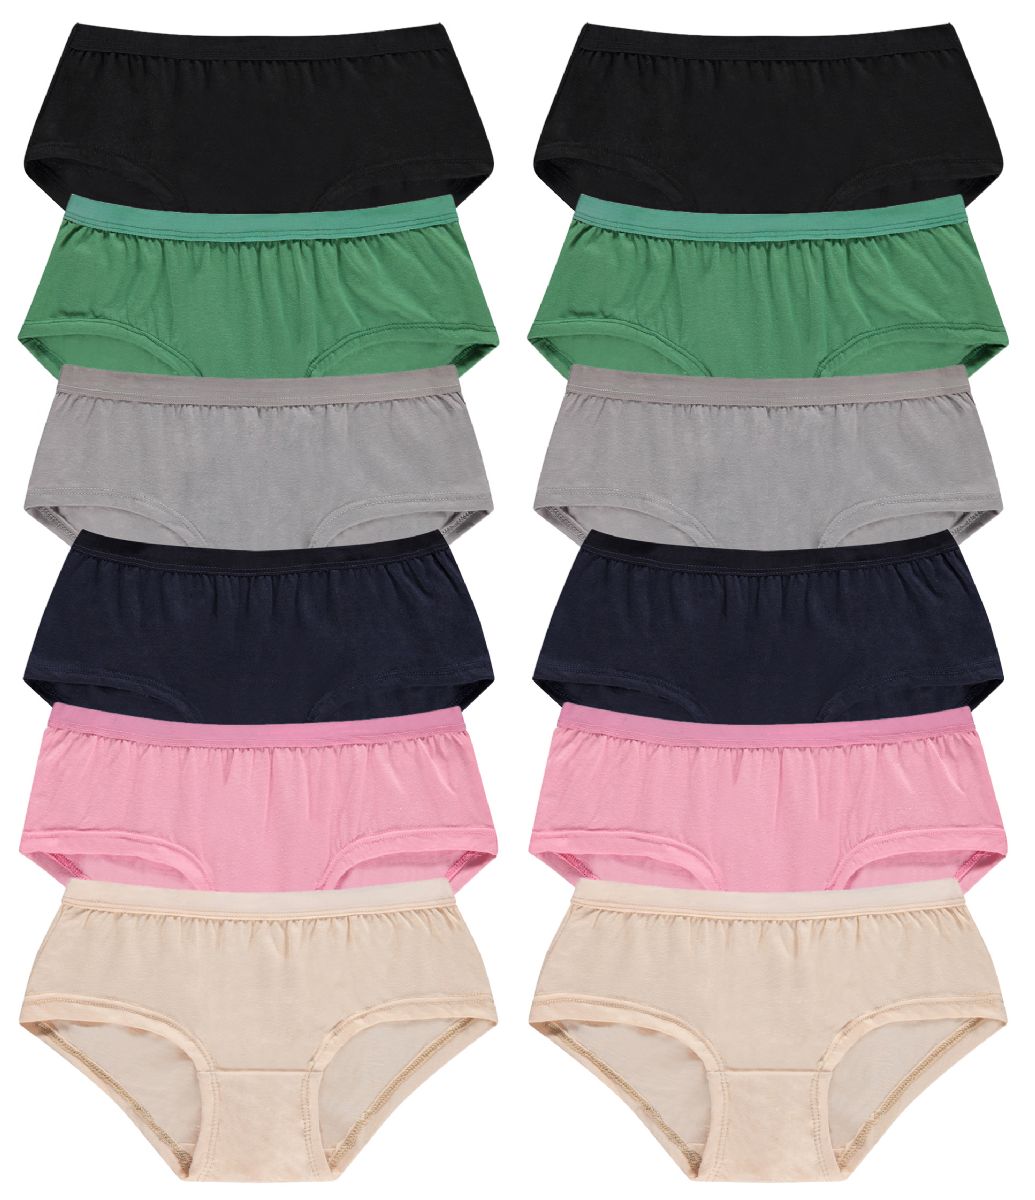 24 Wholesale Yacht & Smith Womens Cotton Lycra Underwear, Panty Briefs, 95%  Cotton Soft Assorted Colors, Size Small - at 